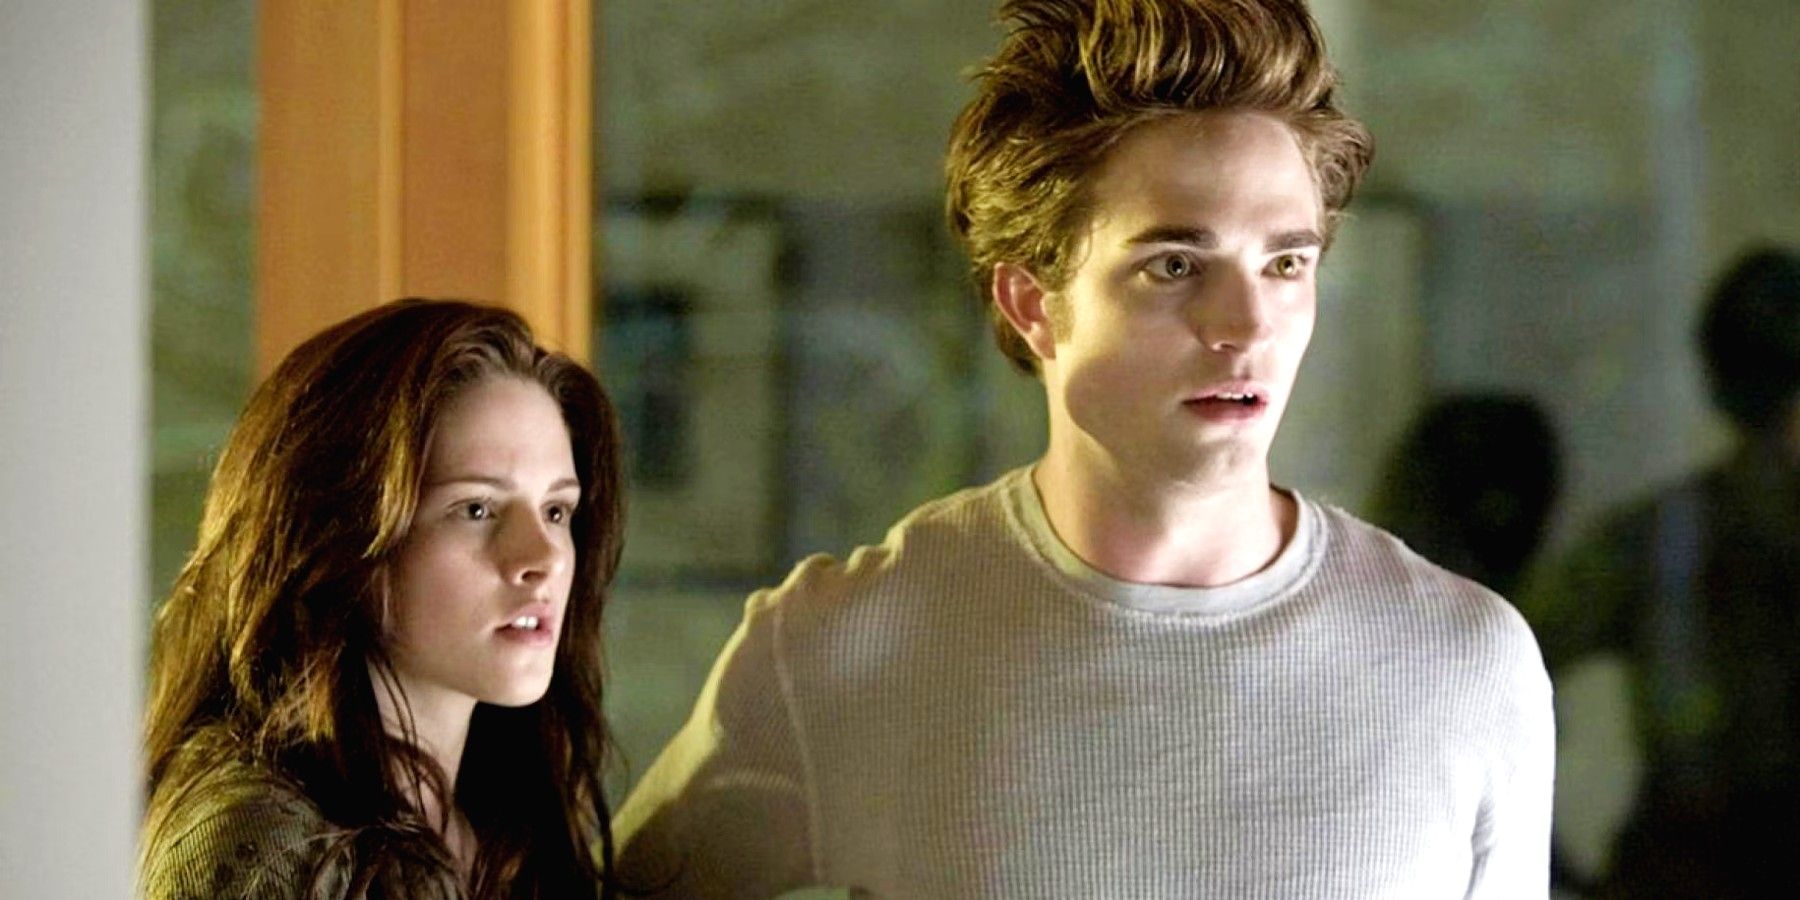 Bella and Edward standing together in the Twilight Saga movies